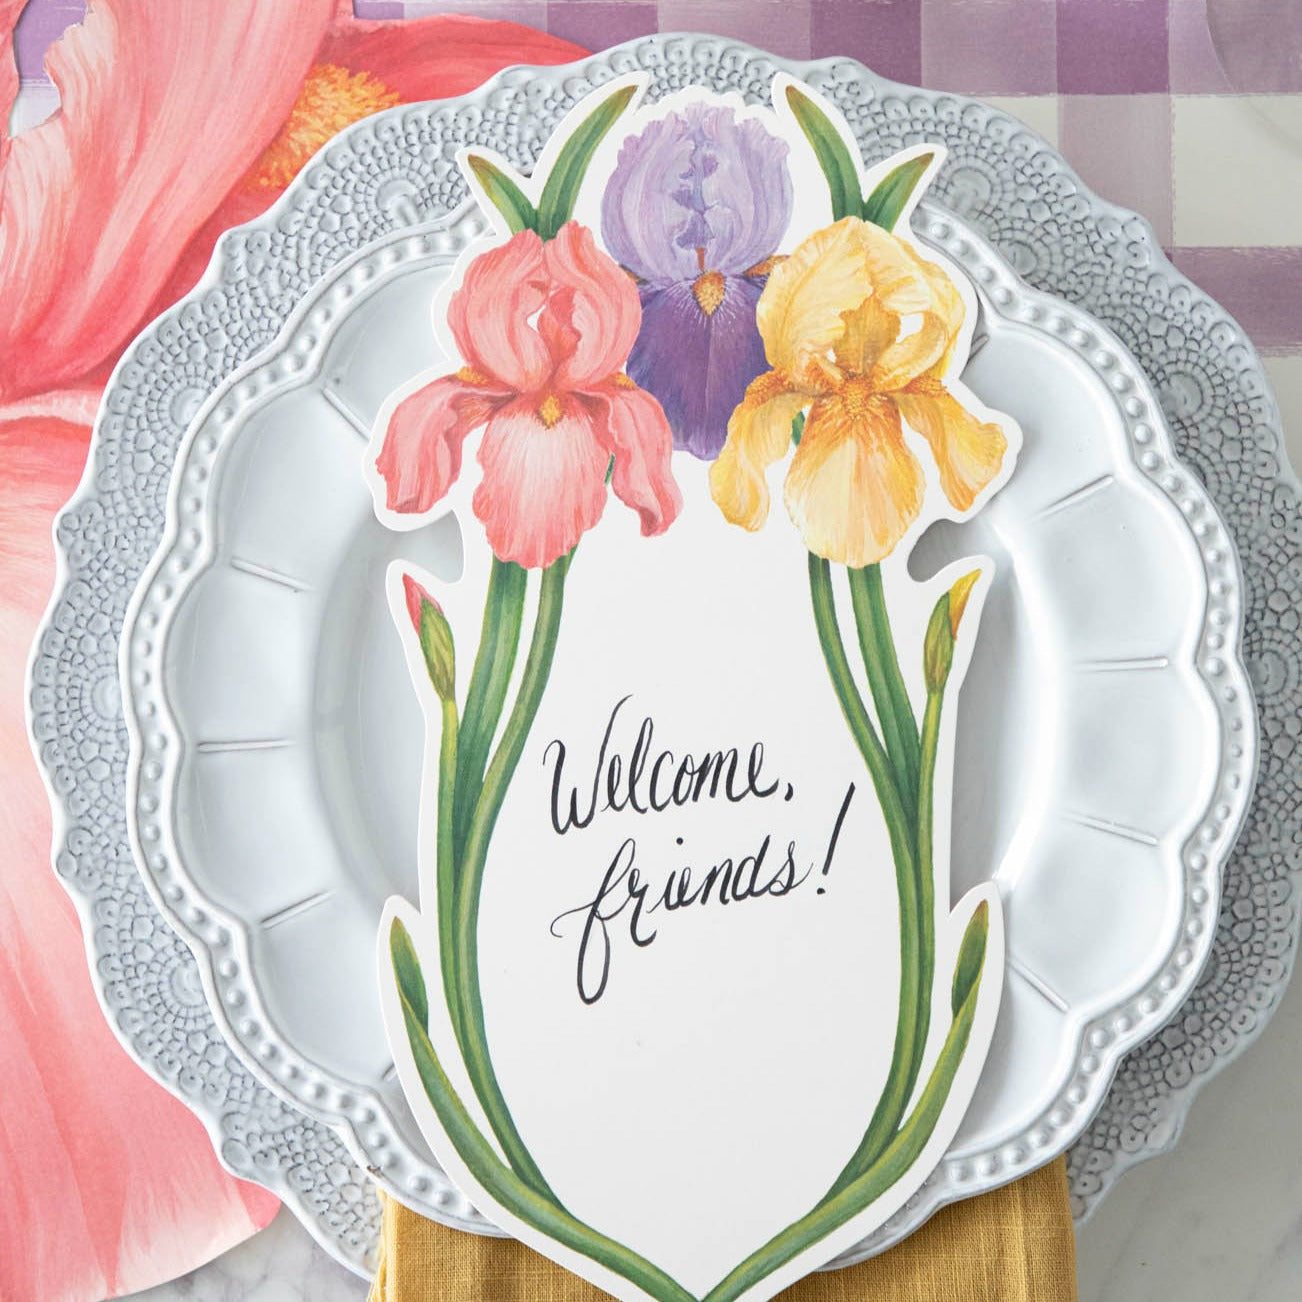 The pink Die-cut Iris Placemat under a vibrant springtime place setting, from above.